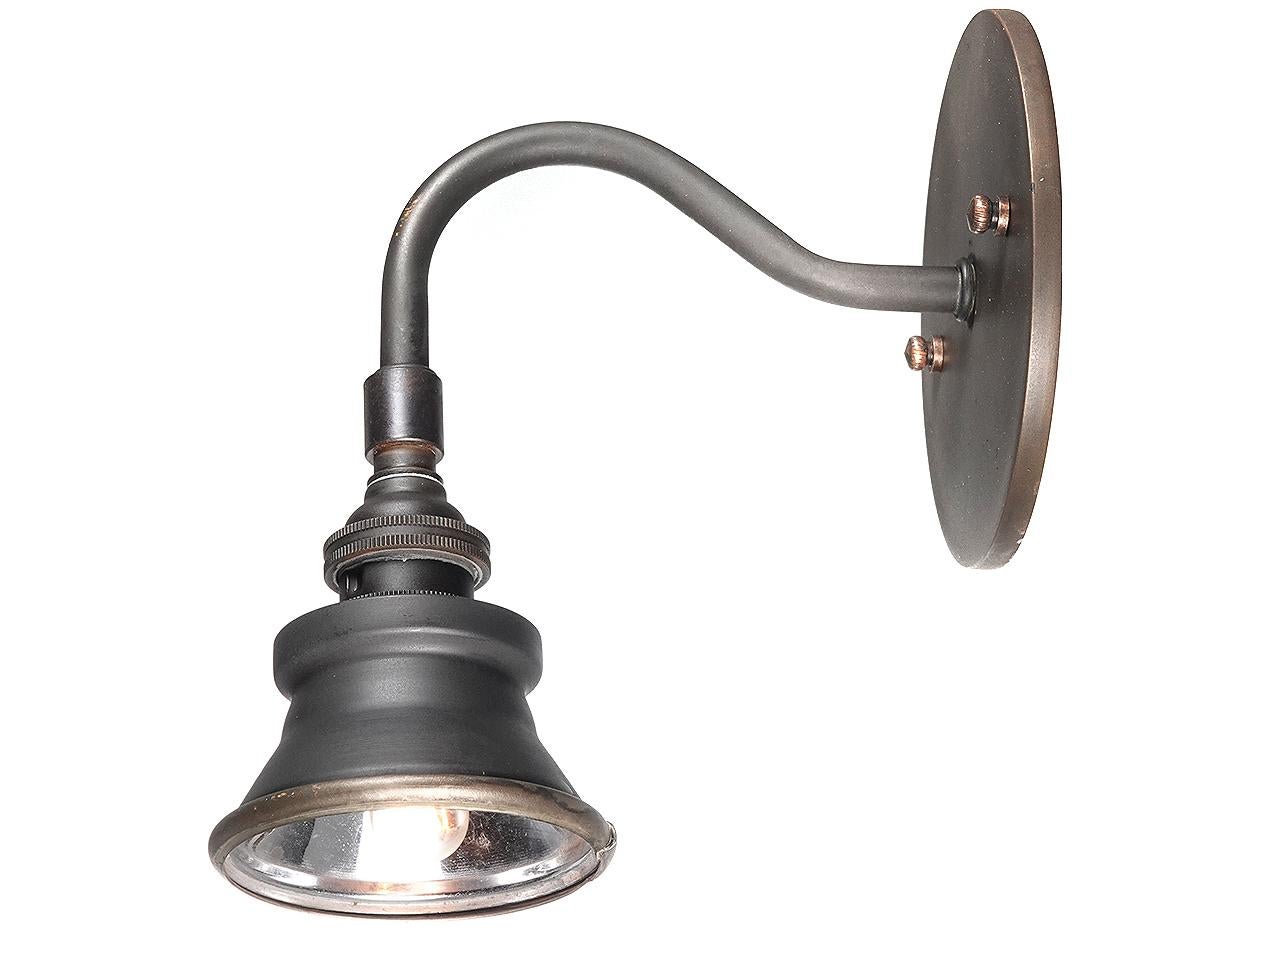 These sconces have the smallest of shades. The early shades are copper with a silvered interior and date to the 1920s. The arm, wall plate and candelabra socket were fabricated by us to create this unique wall lamp. The lamps have a simple clean